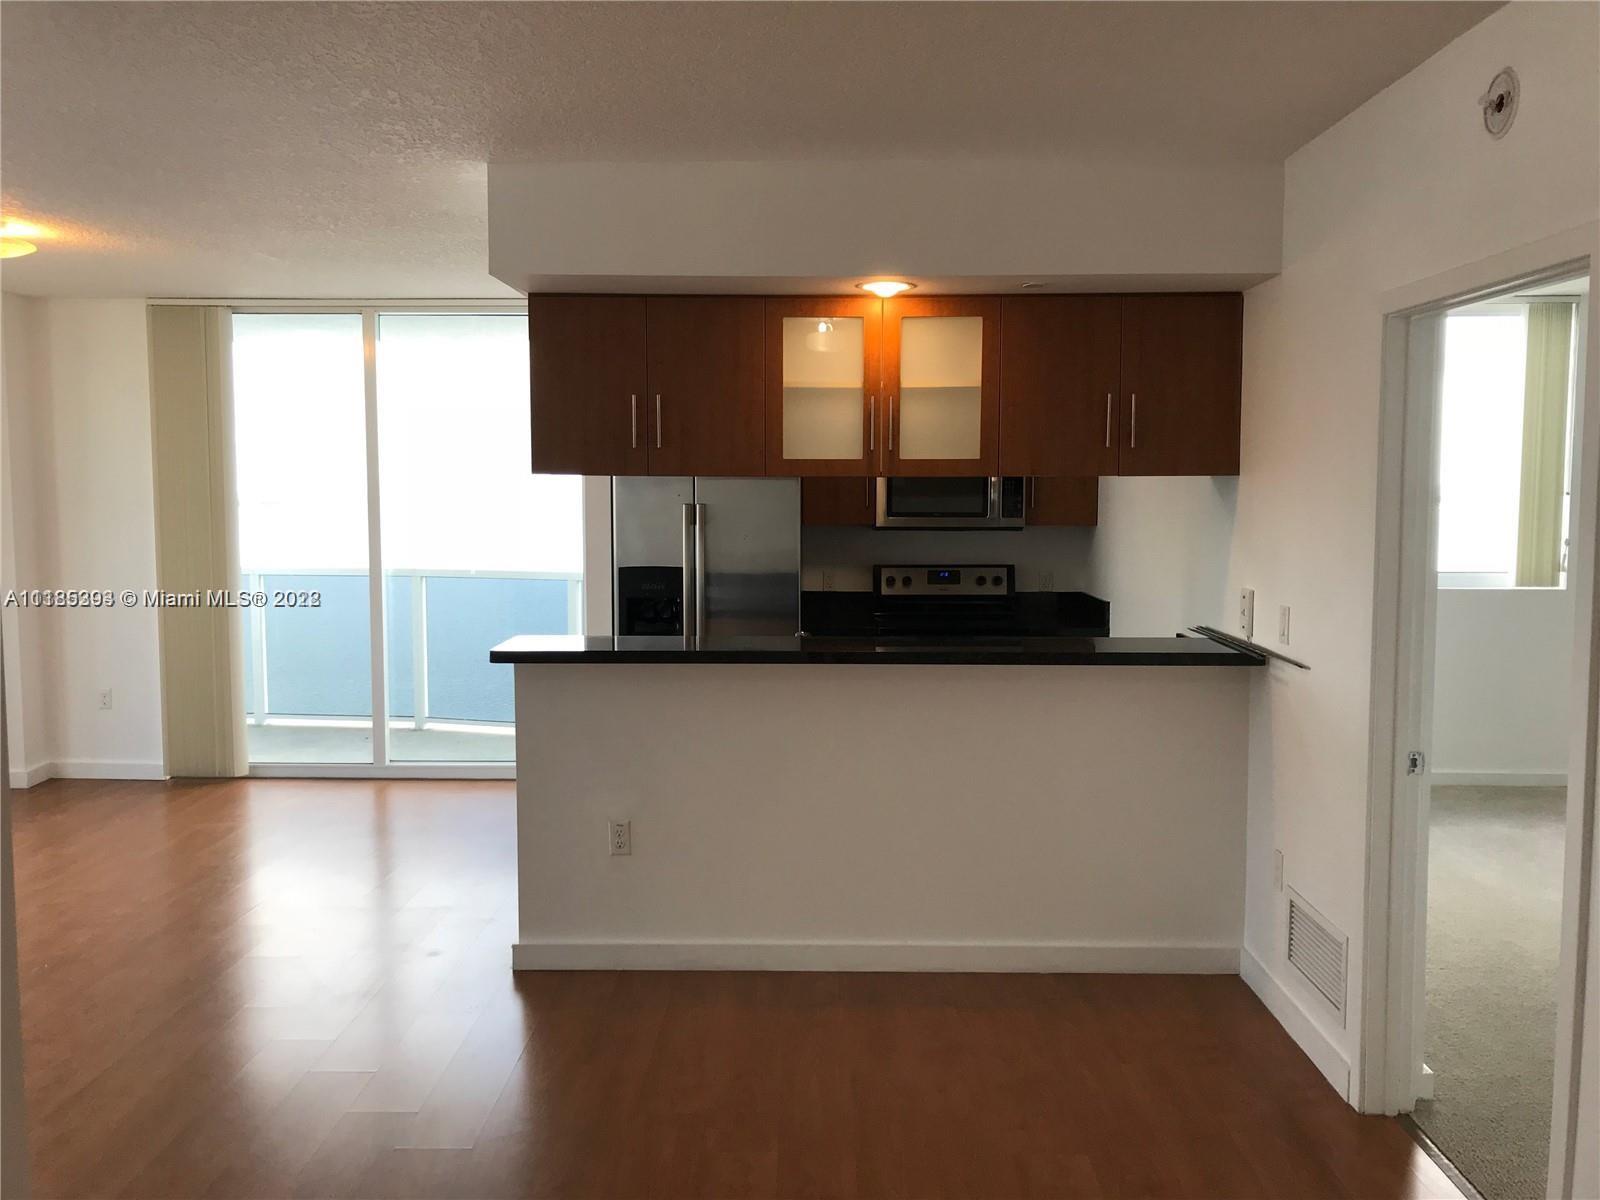 VERY LARGE 3 BEDROOM UNIT AT 23 BISCAYNE CONDO, AMAZING OCEAN VIEW FROM THE BALCONY, CONDO HAS A GREAT POOL WITH BEAUTIFUL VIEW! LARGE GYM, VERY WELL LOCATED. PLEASE TEXT ME TO SET UP A MEETING!